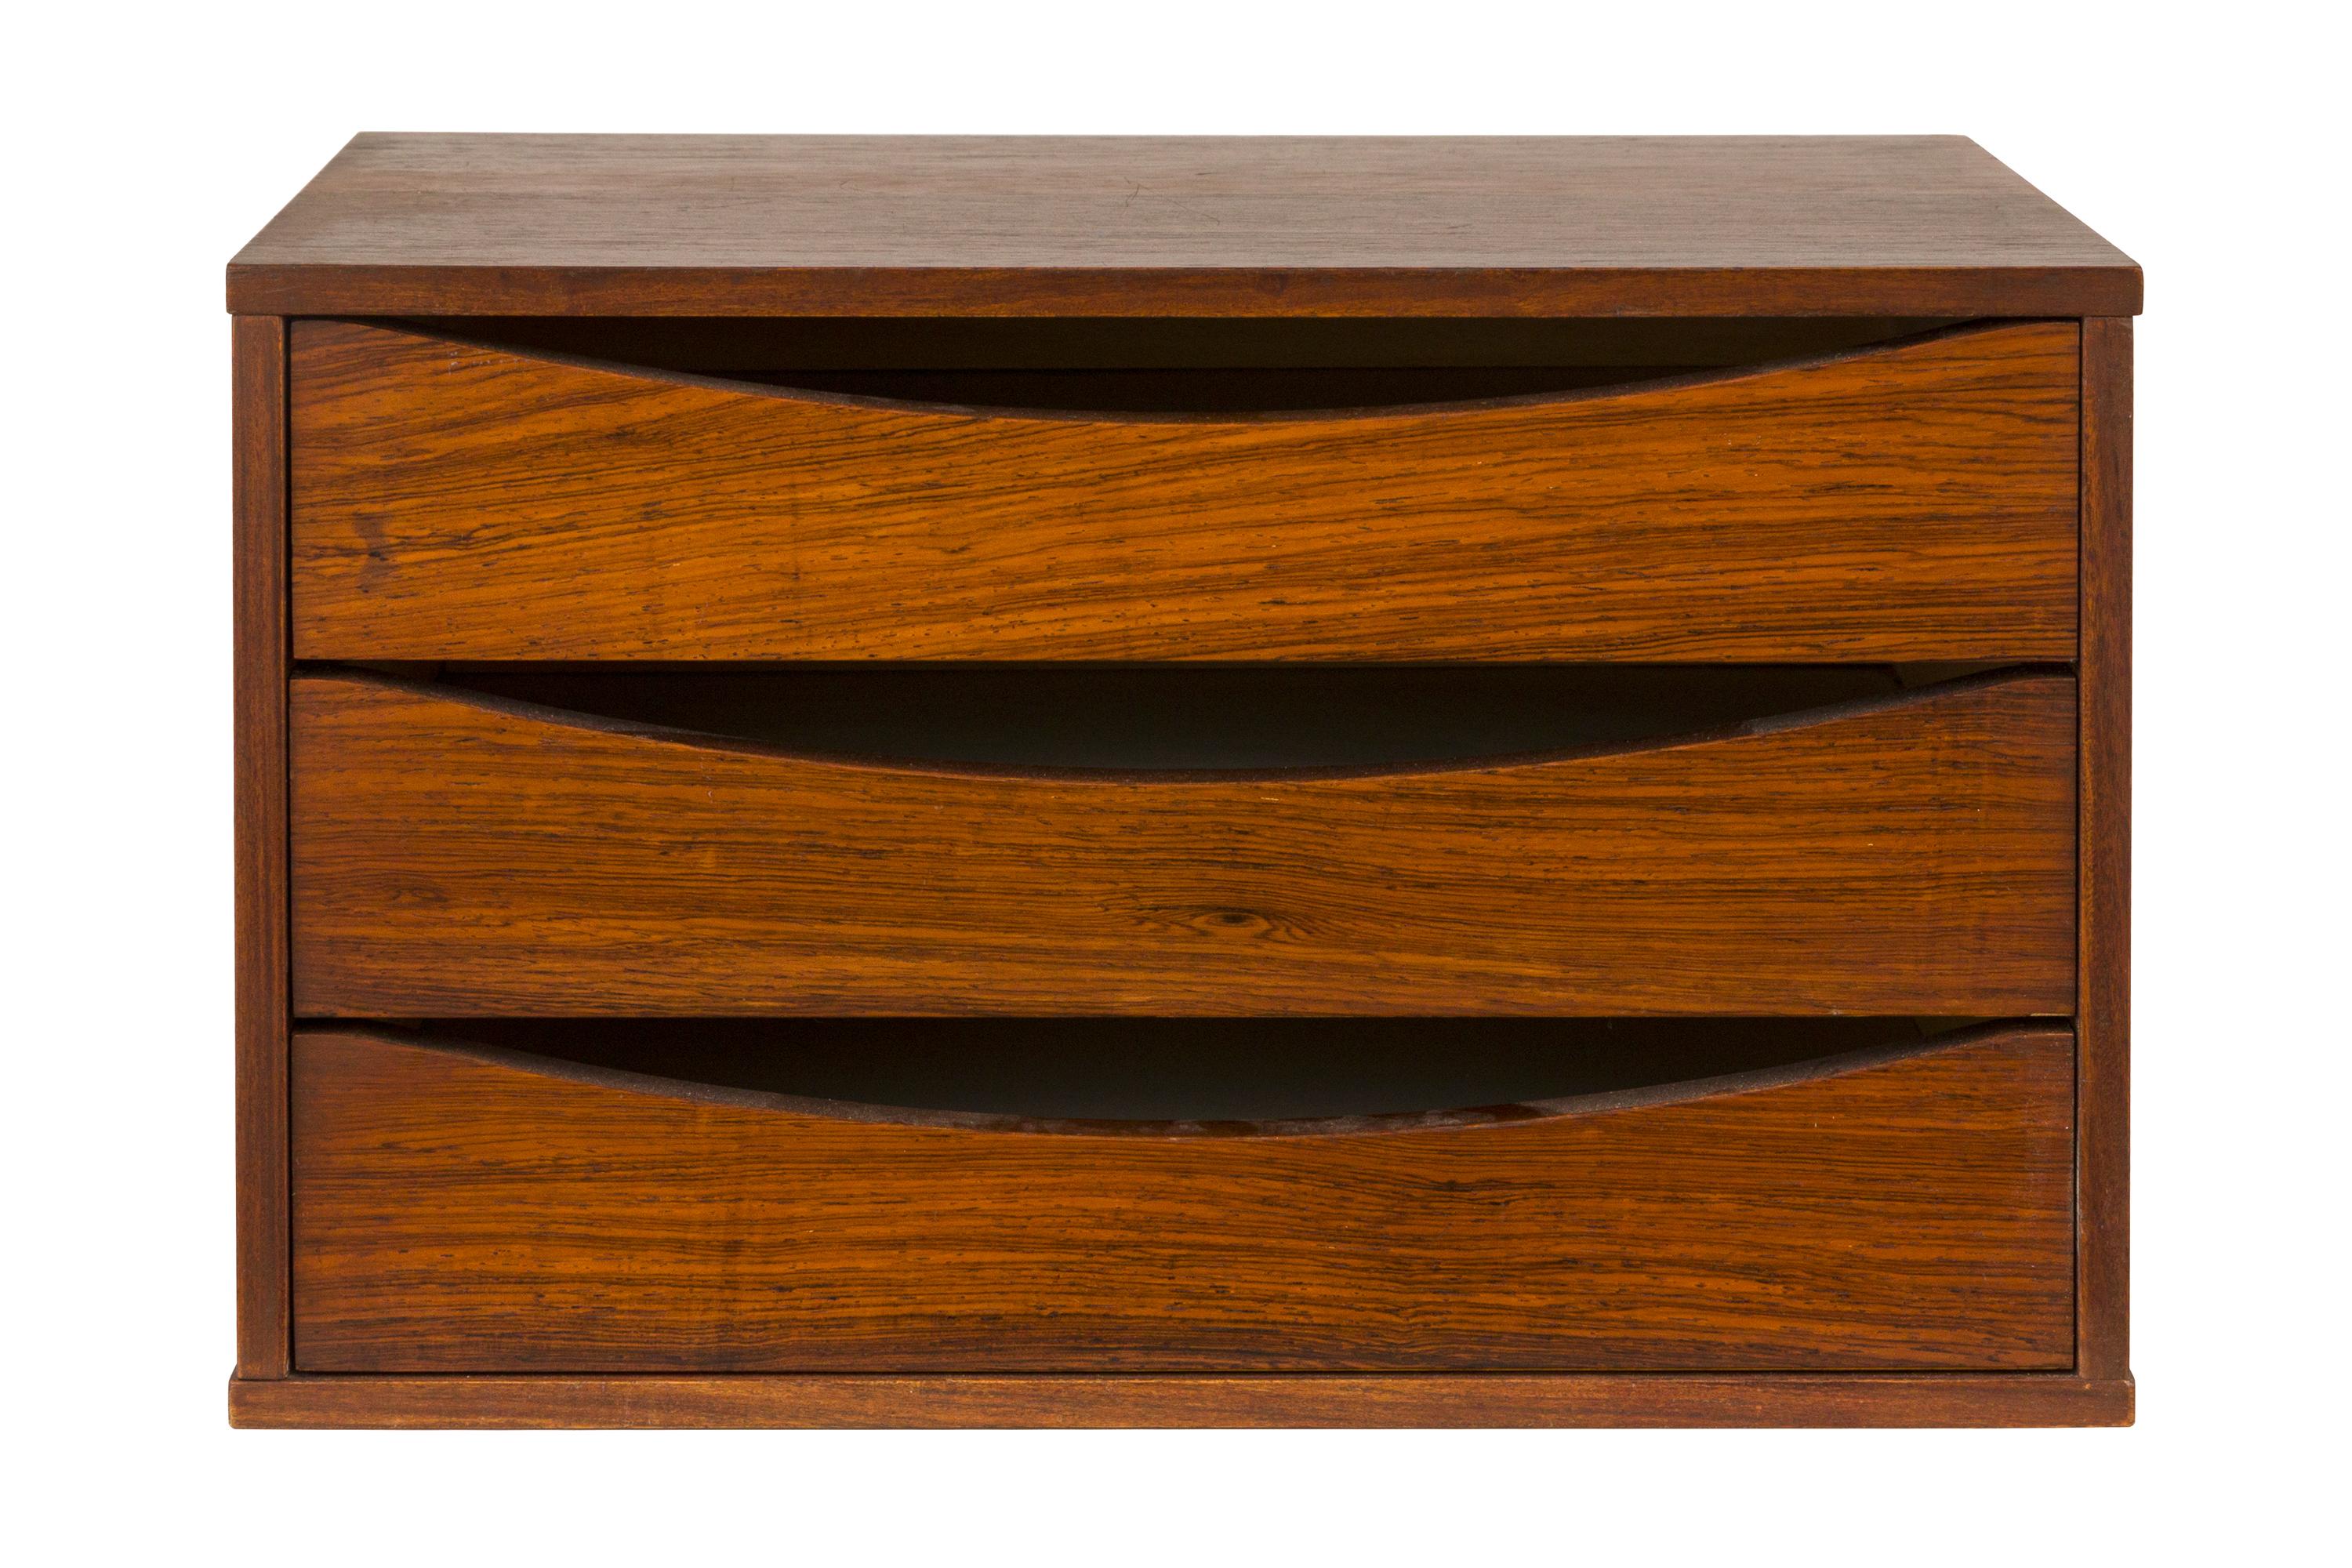 A practical and attractive small chest of drawers that could be used for a variety of purposes. Usually found in teak, this is an outstanding rosewood version.